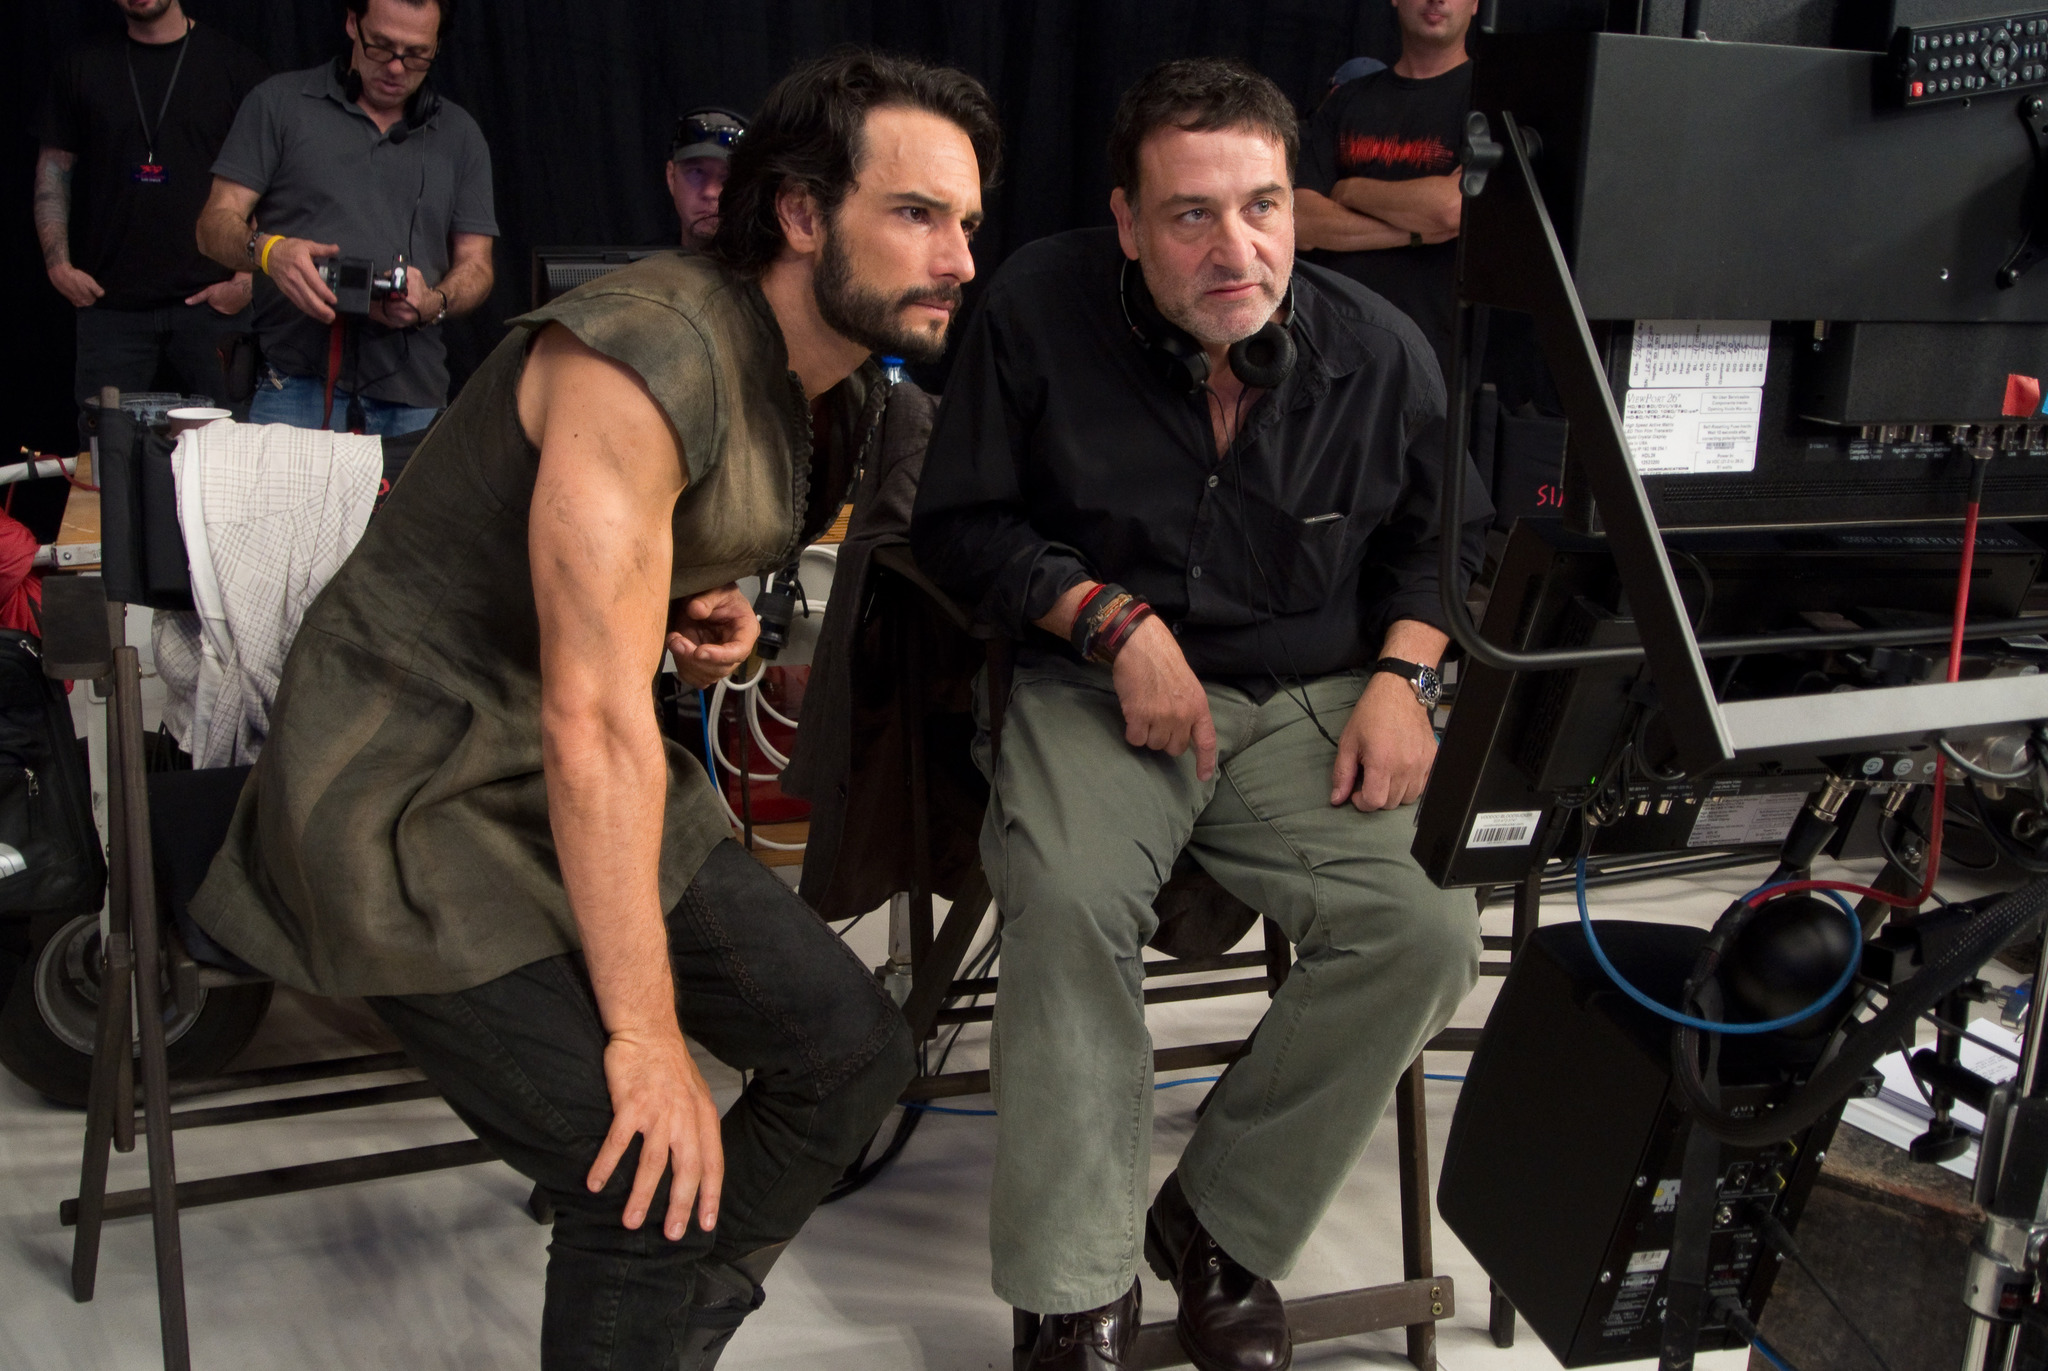 1. Who is the Director of "300: Rise of an Empire (2014)"? Noam Murro.